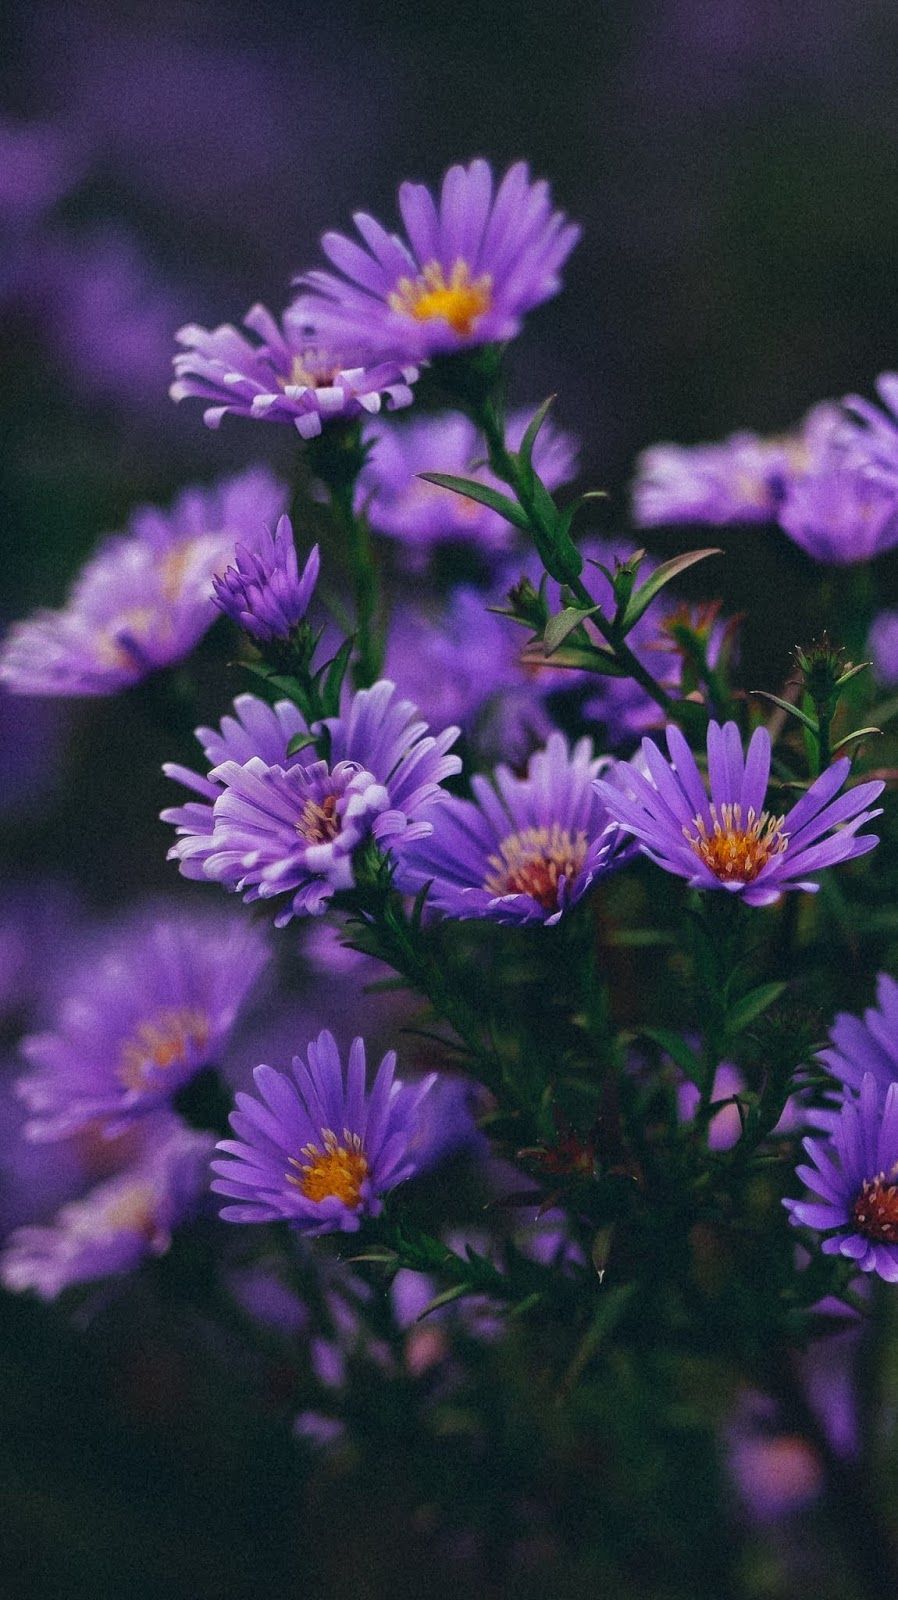 A bunch of purple flowers with yellow centers - Flower